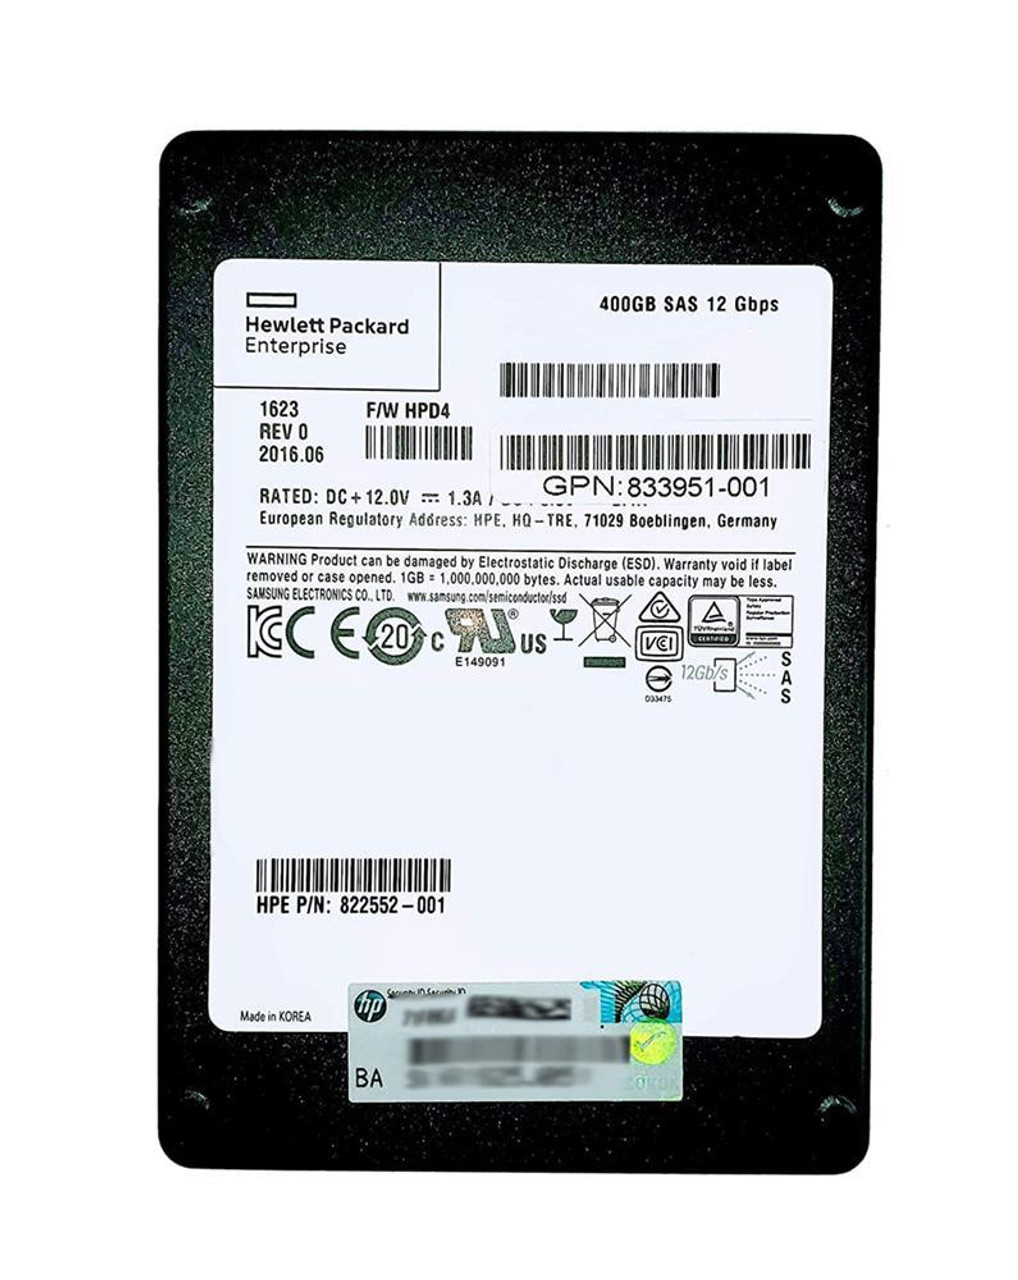 822552-001 HPE 400GB SAS 12Gbps Mixed Use 2.5-inch Internal Solid State Drive (SSD) for MSA